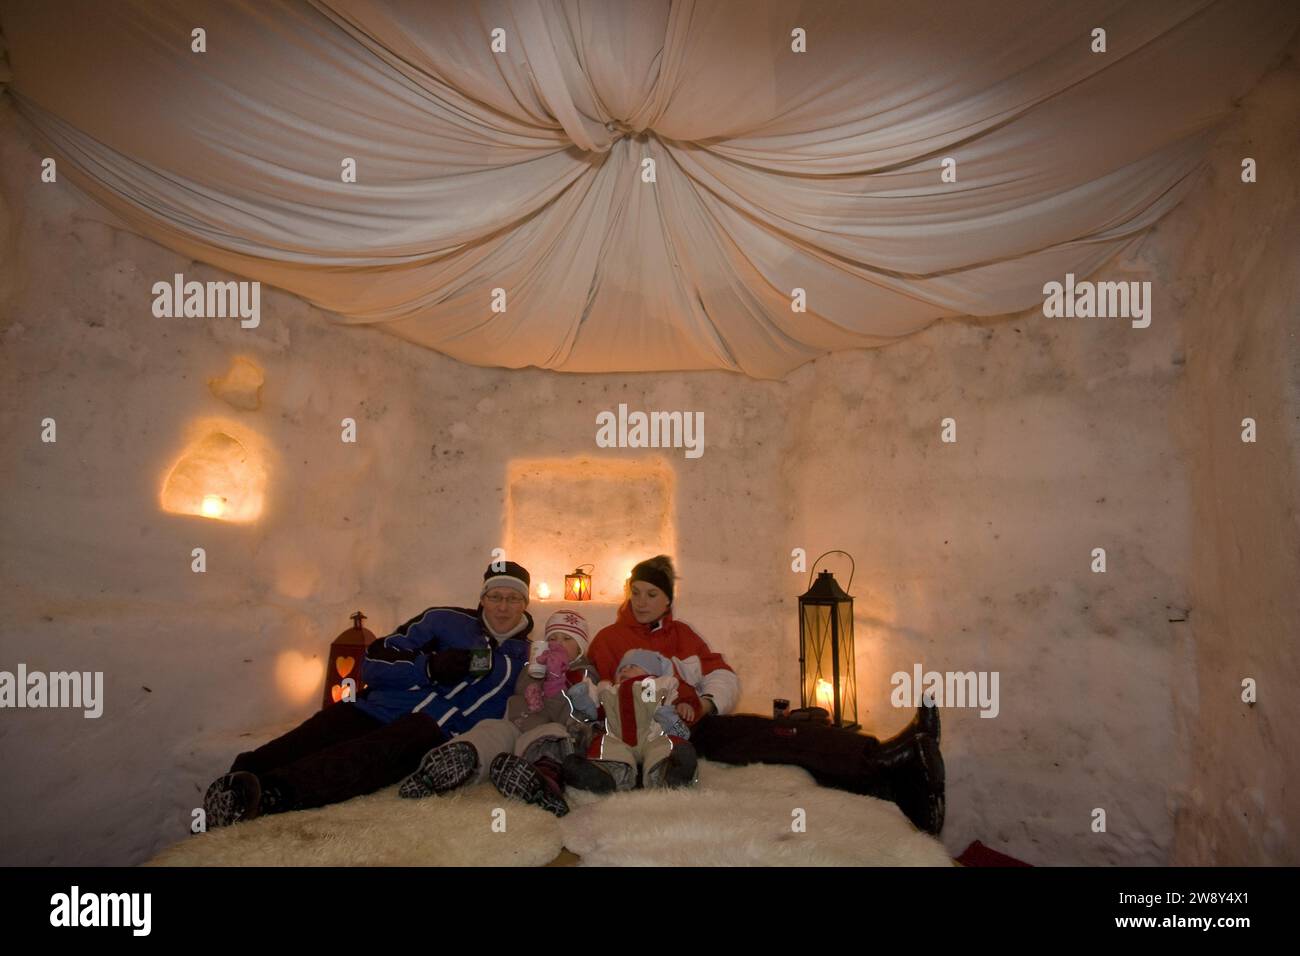 Eisiglu in Oberwiesenthal, The holiday park offers overnight stays in one of the most extraordinary forms! An unforgettable night in an igloo with Stock Photo